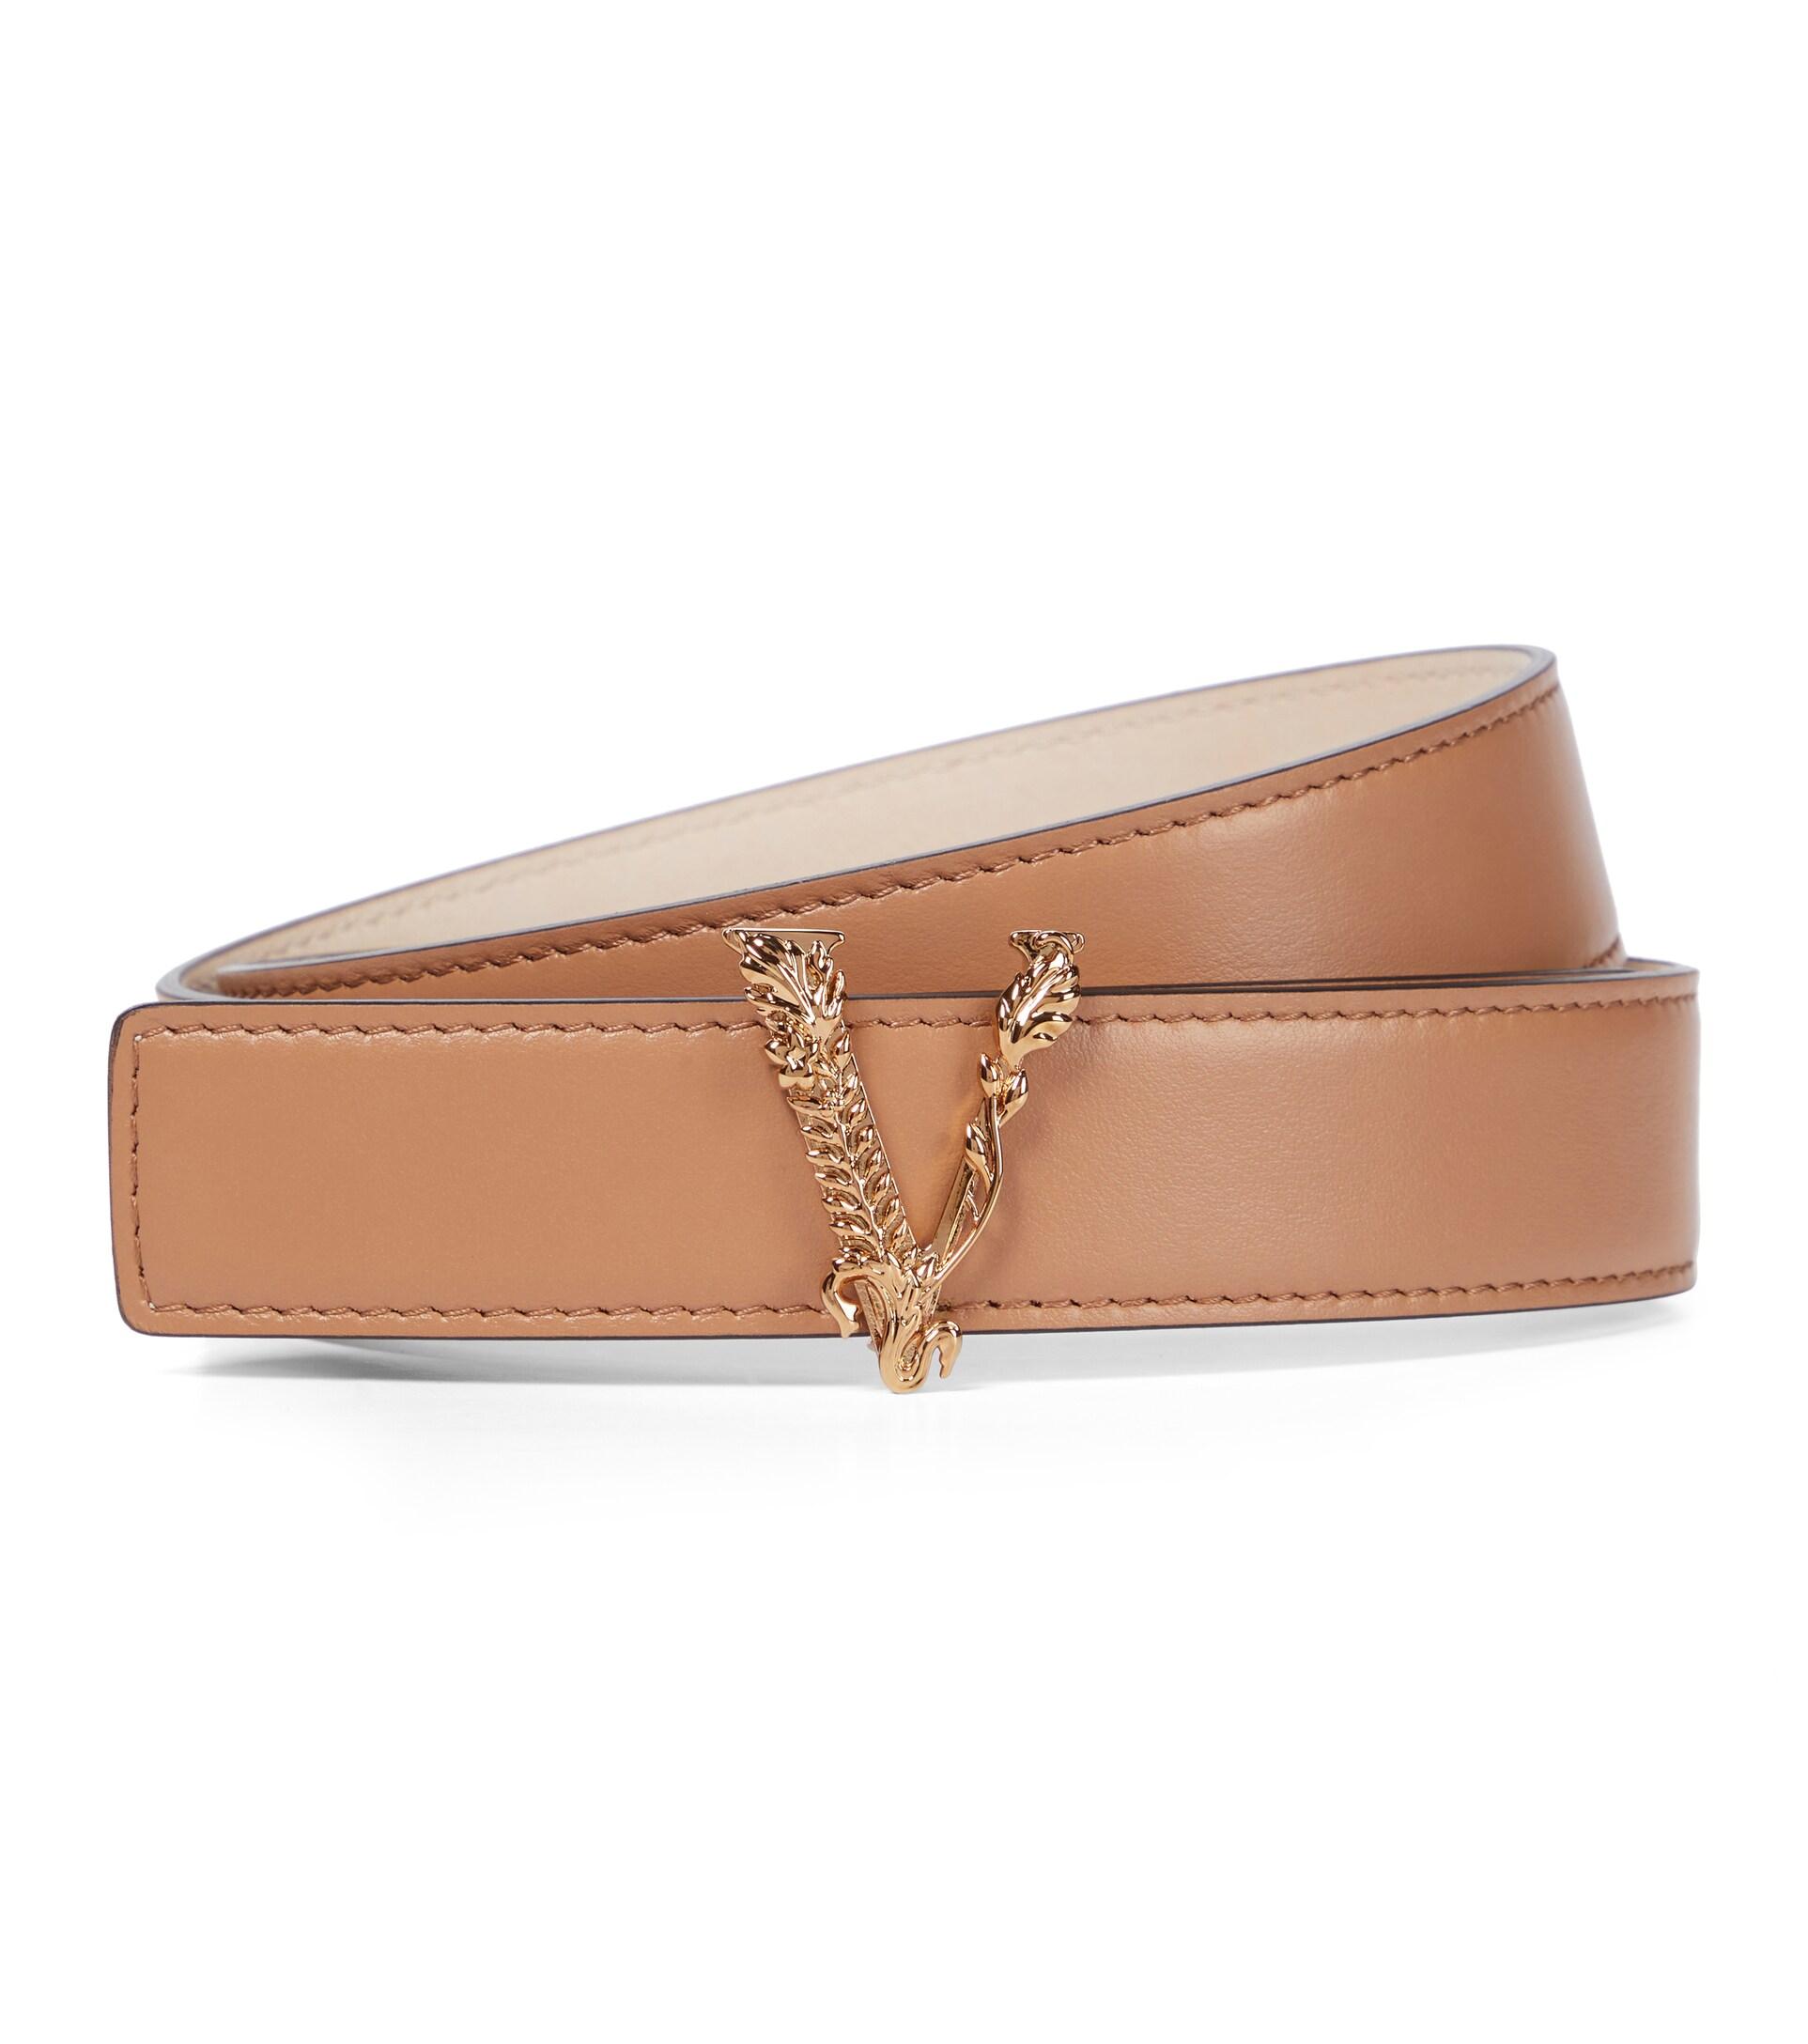 Versace Virtus Leather Belt in Natural | Lyst